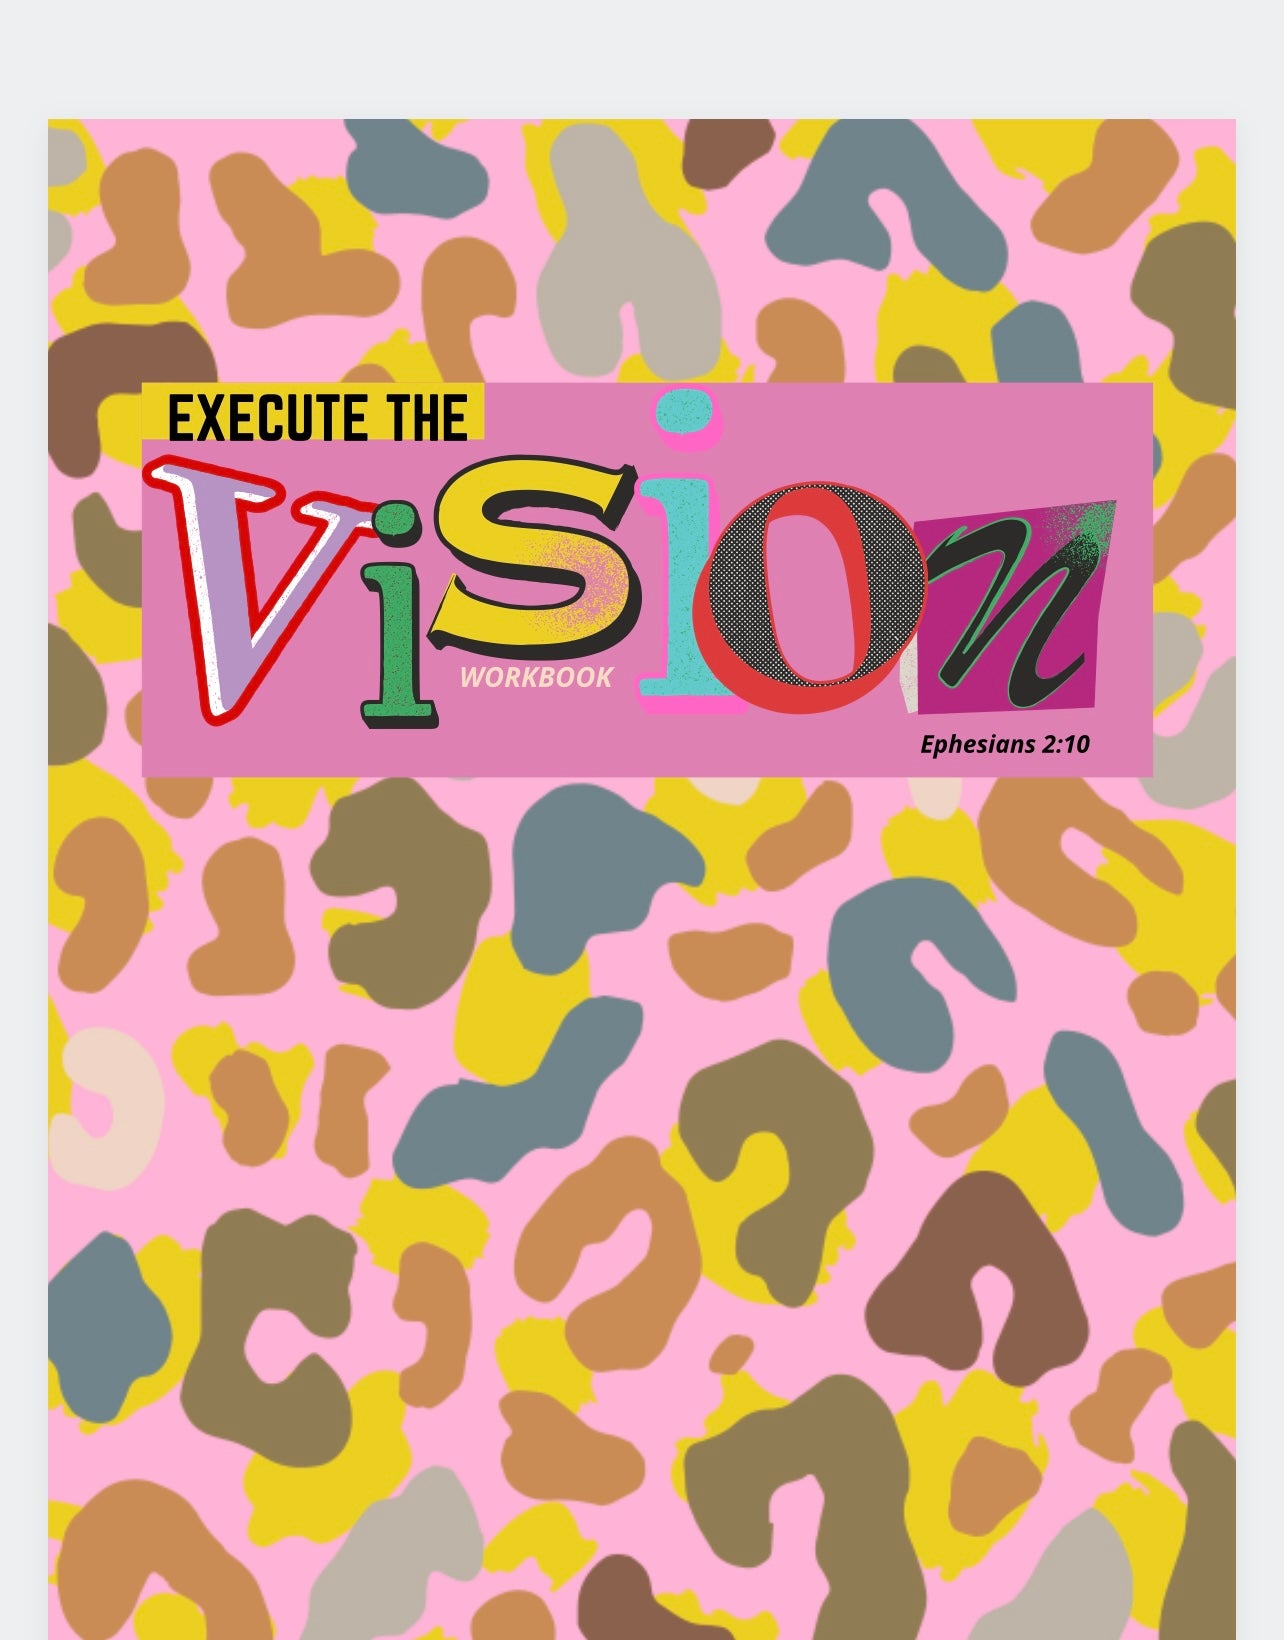 Execute The VISION Workbook *HARD COPY VERSION 24 pages* DIGITAL DOWNLOAD OPTION AVAILABLE